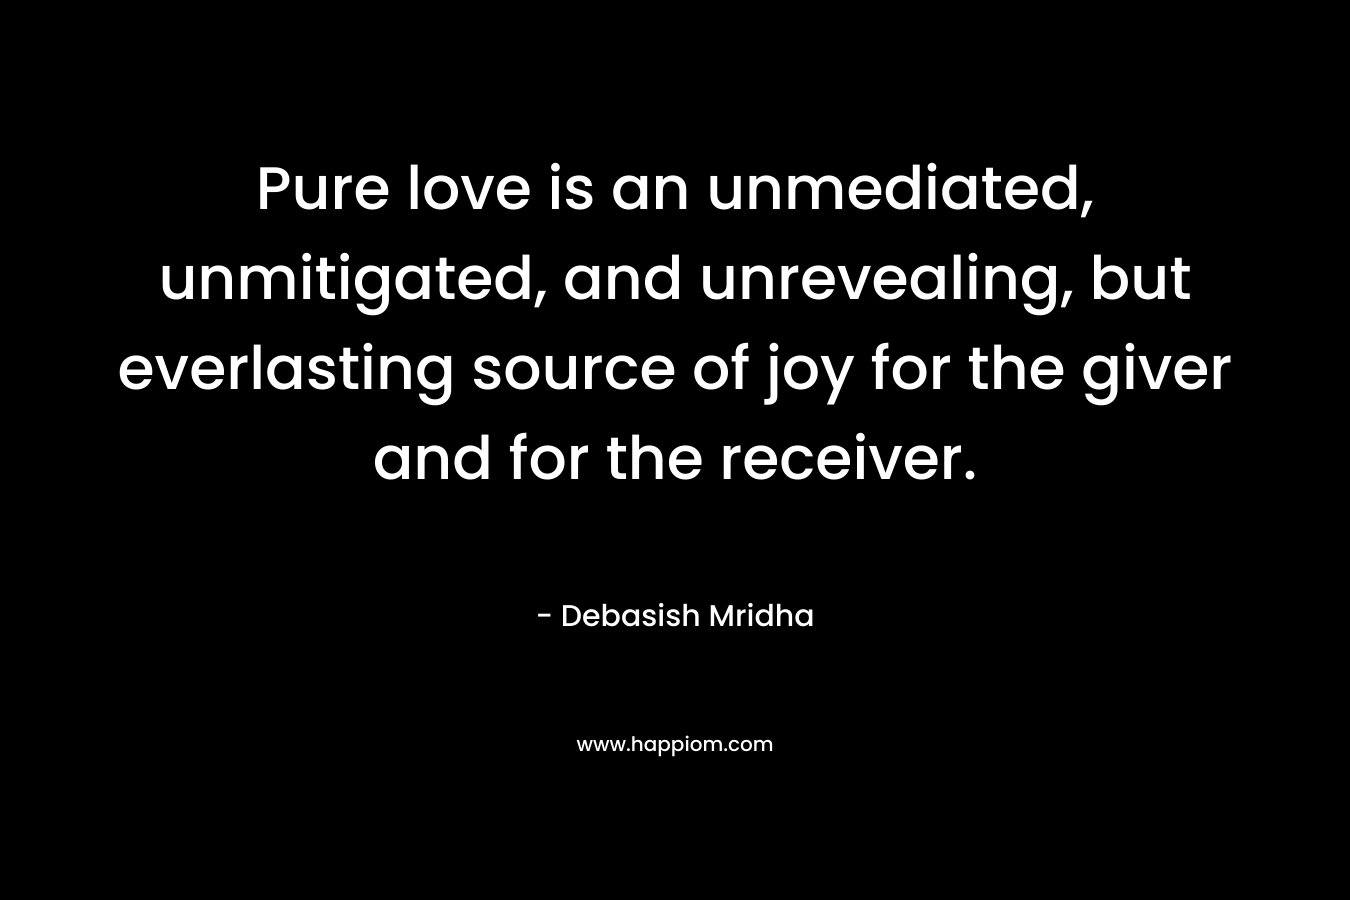 Pure love is an unmediated, unmitigated, and unrevealing, but everlasting source of joy for the giver and for the receiver.